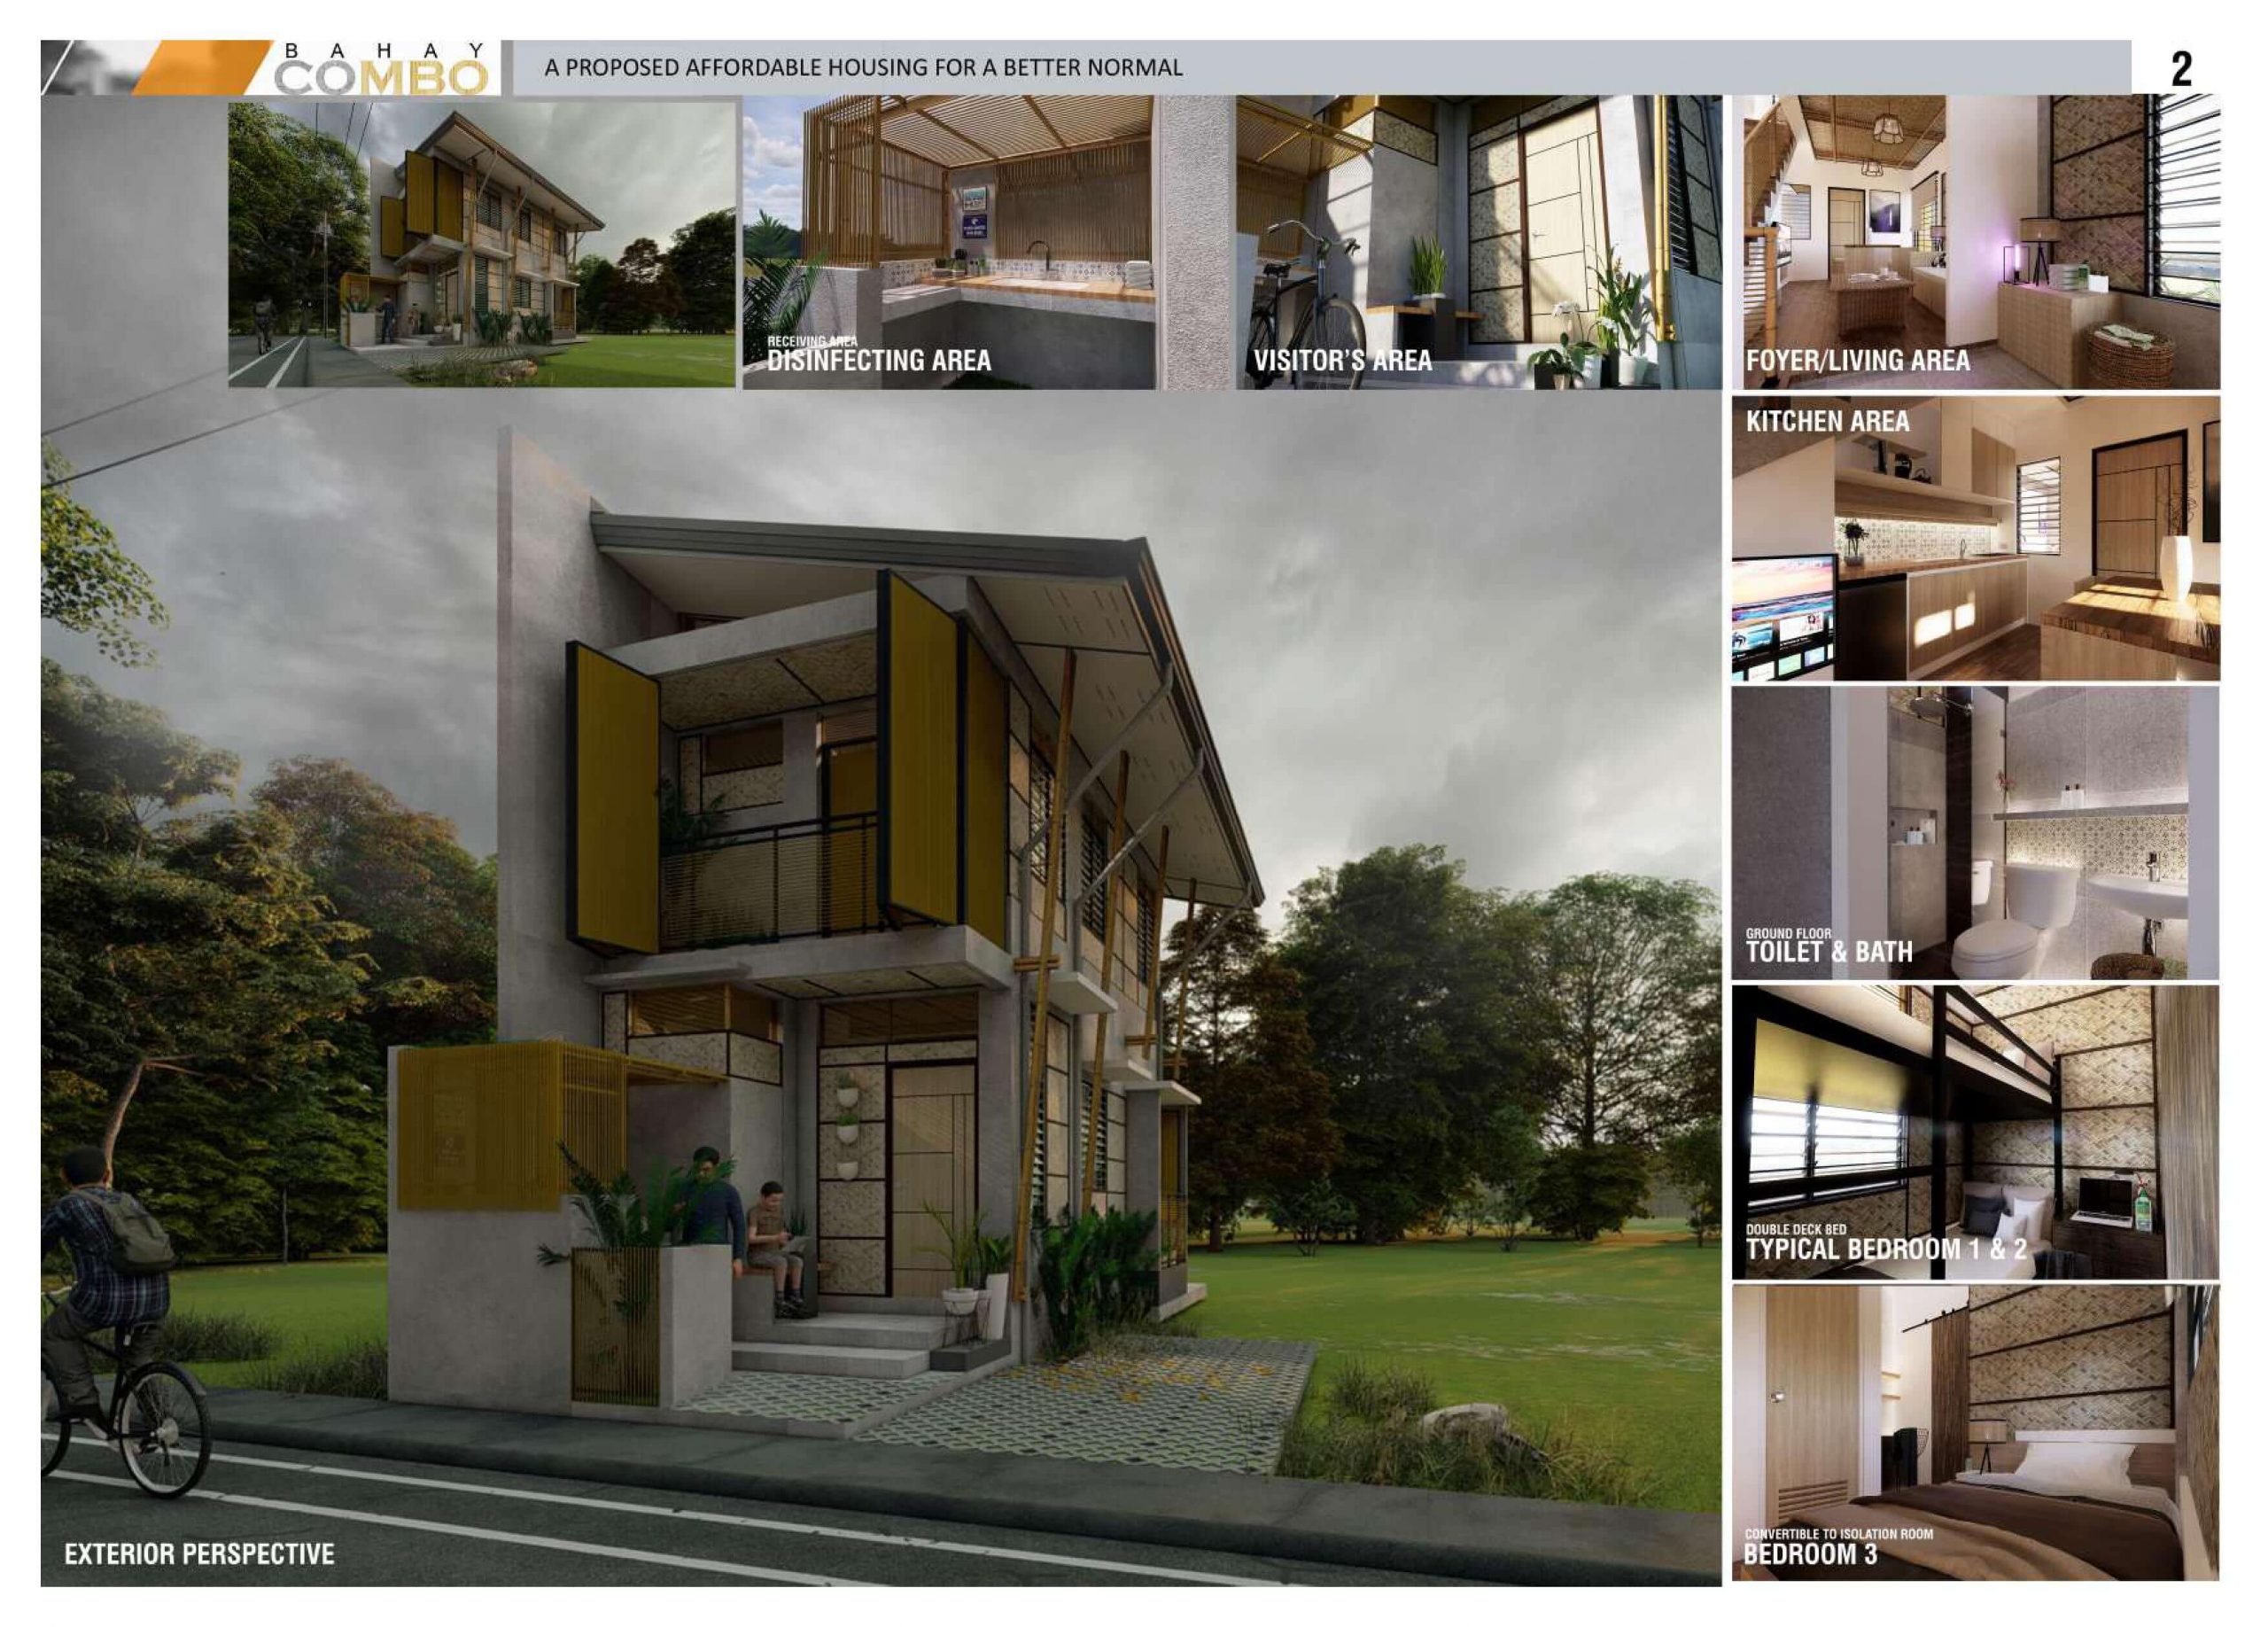 Bahay Combo by Ezekiel Dela Cruz from Cavite State University was awarded champion in the STRUKTURA design competition.